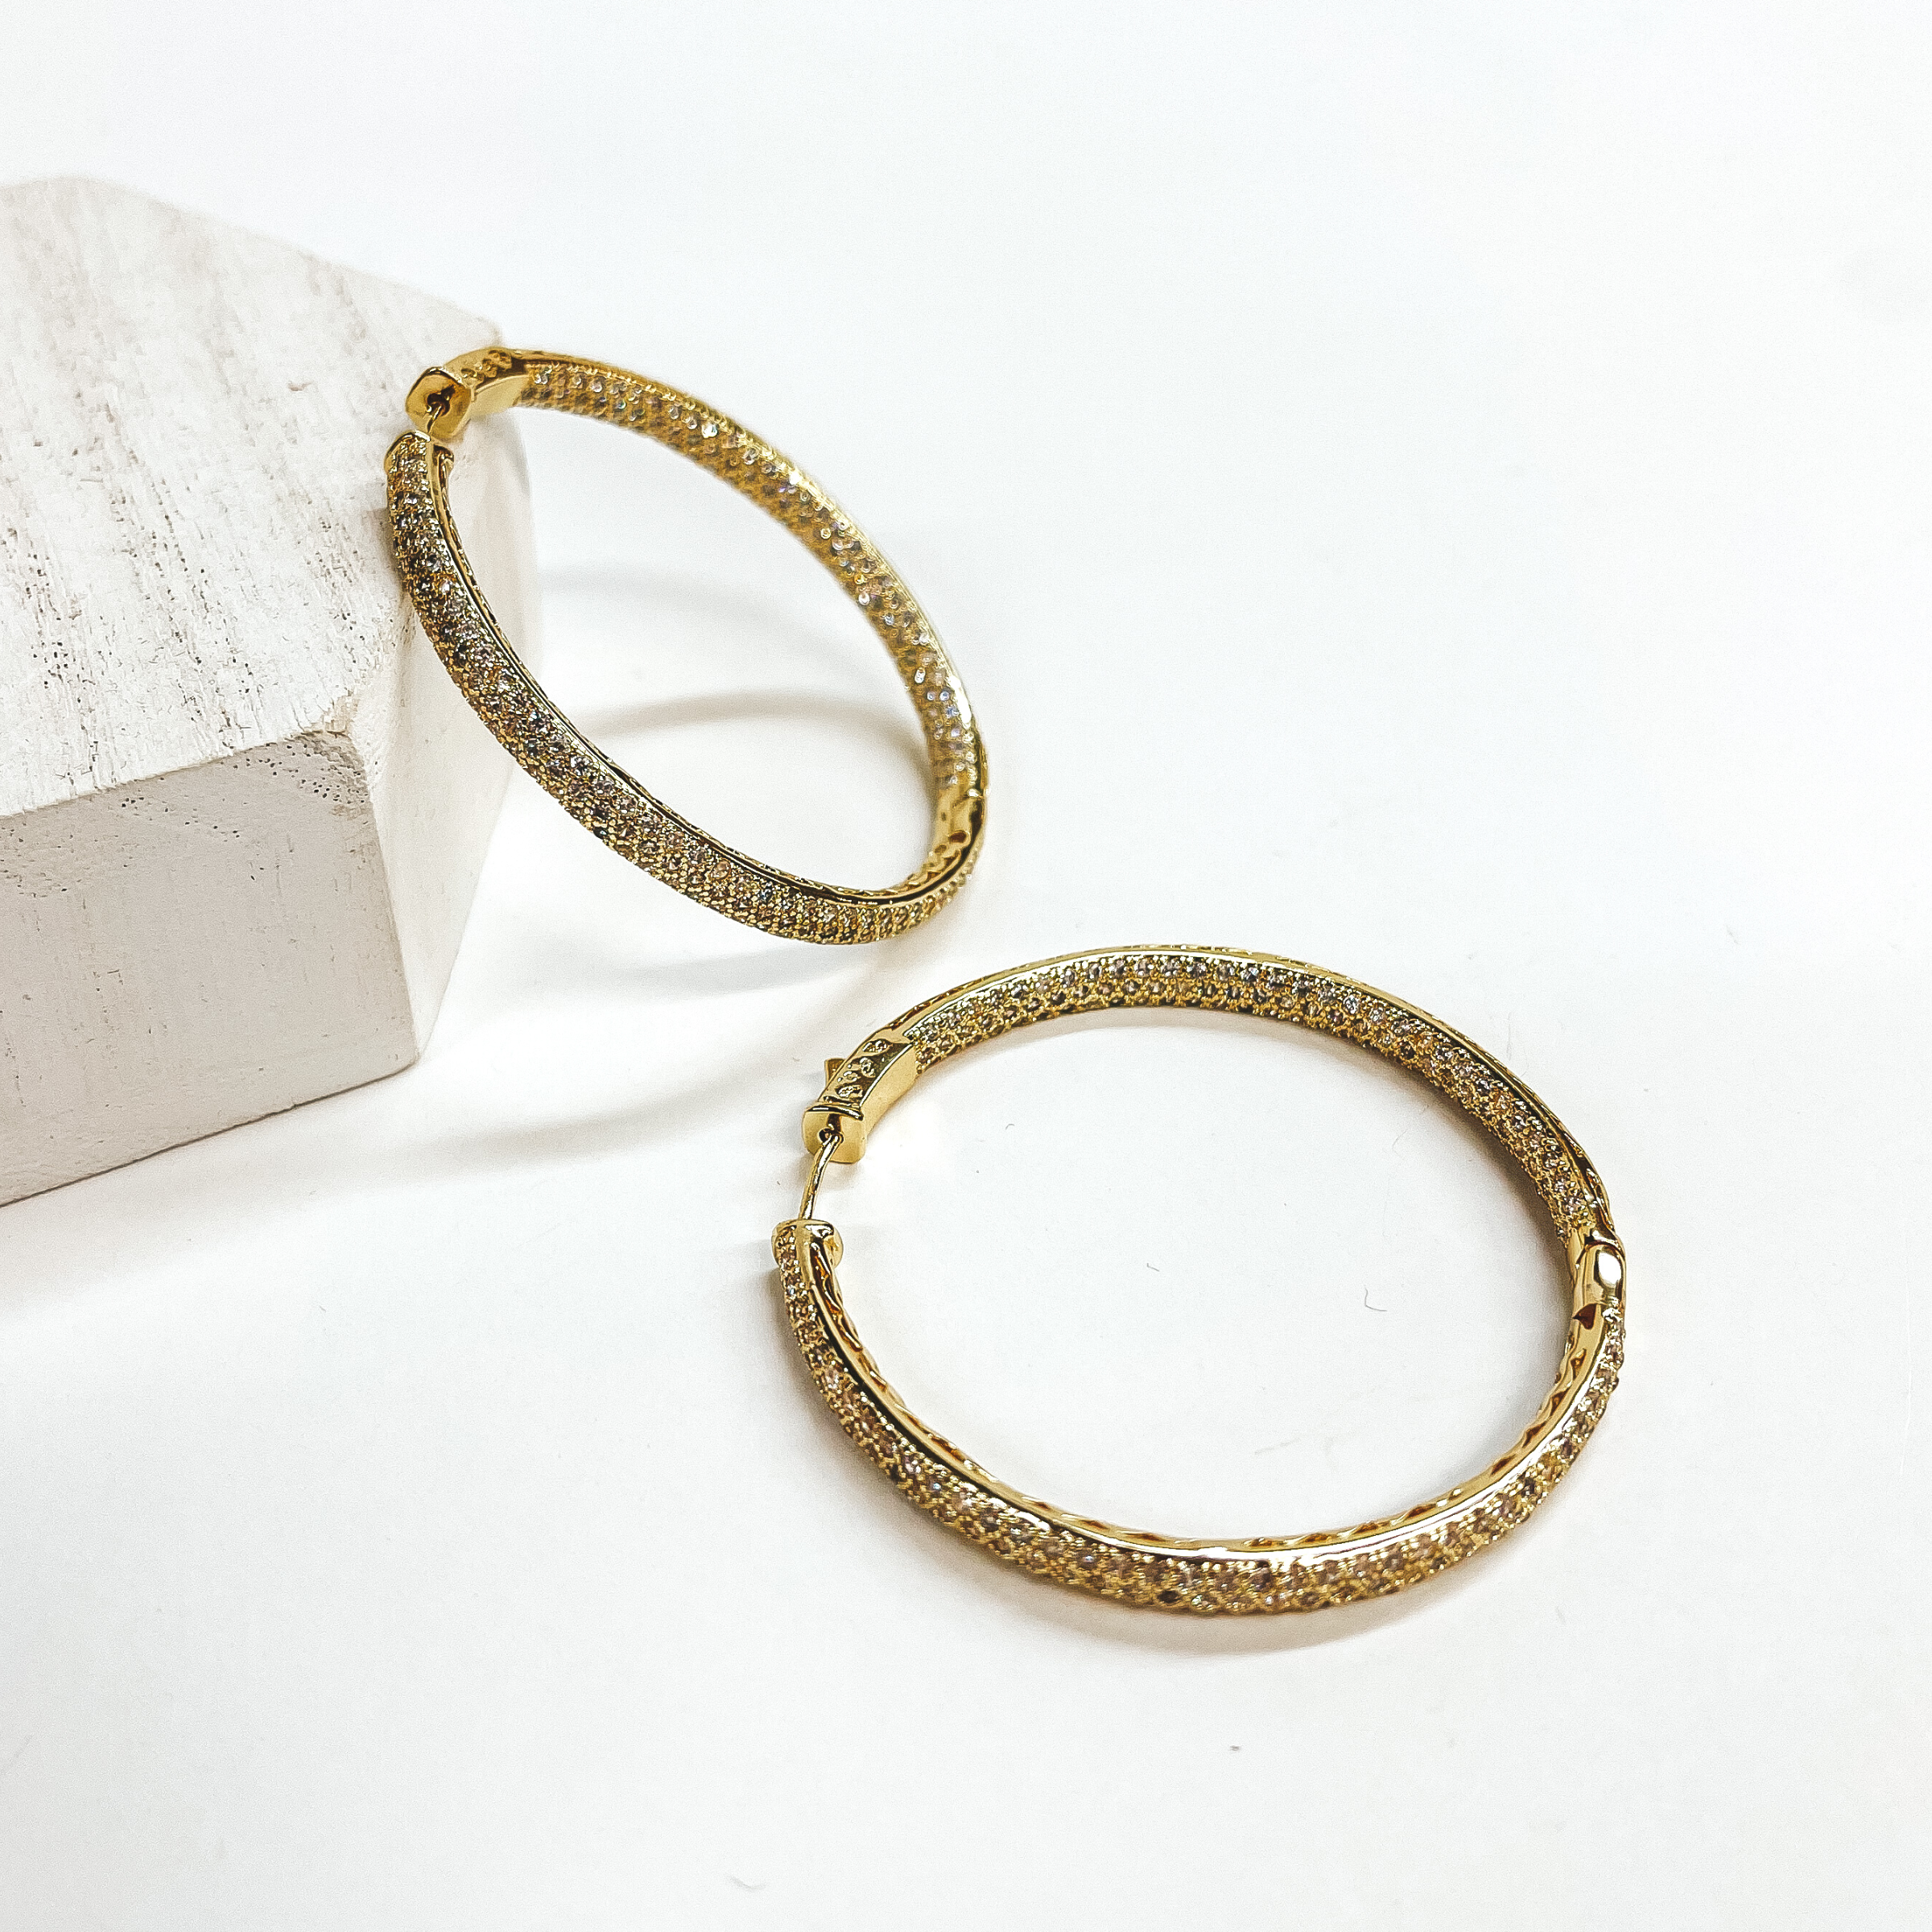 CZ Crystal Pave Hoop Earrings in Gold - Giddy Up Glamour Boutique